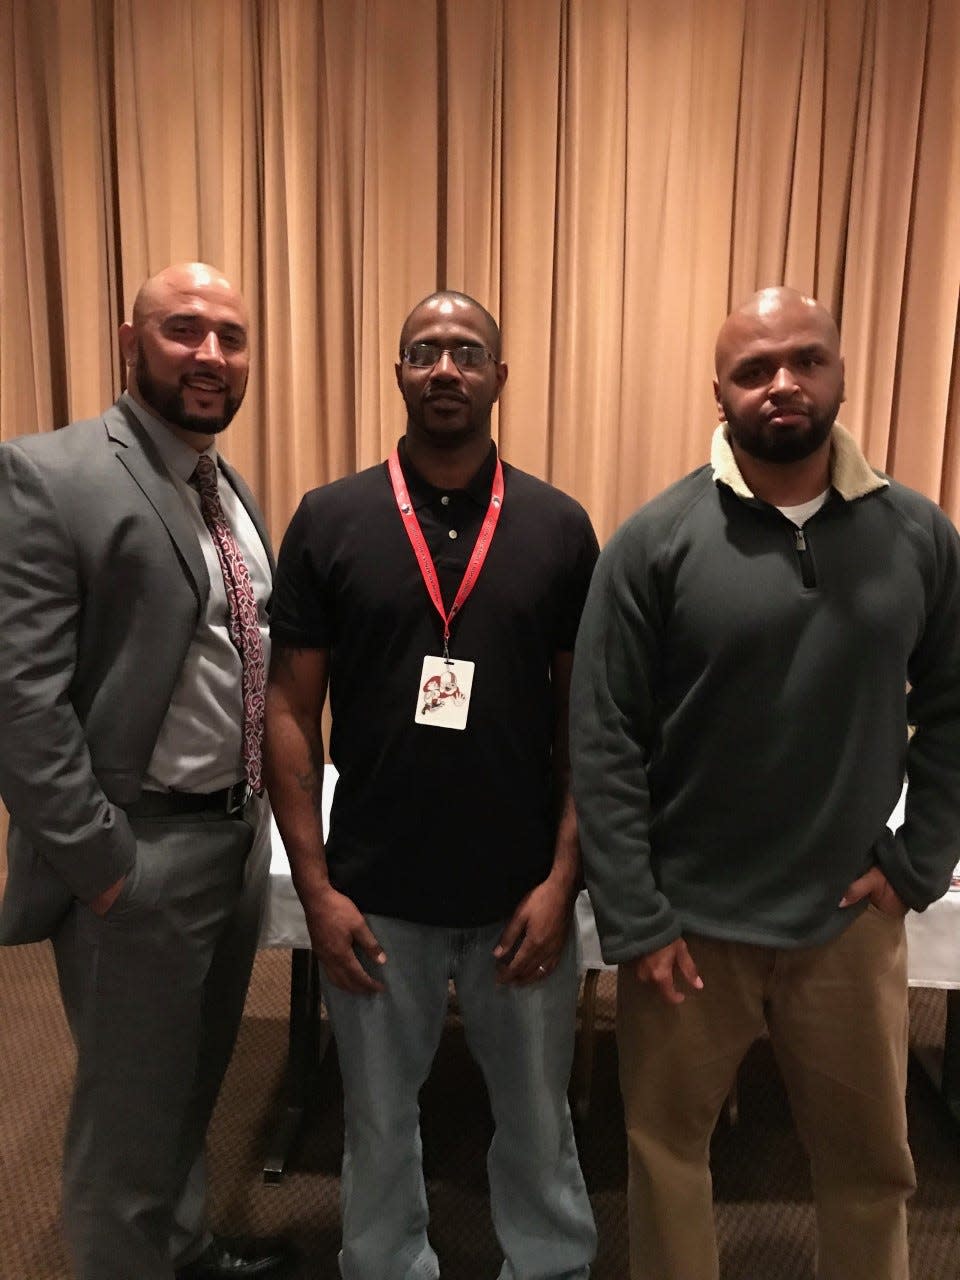 Former McKinley football standouts (from left) Andre Hooks, James Gamble and Matt Curry, who helped the Bulldogs win a 1997 national championship, pose for a photo together in 2017.